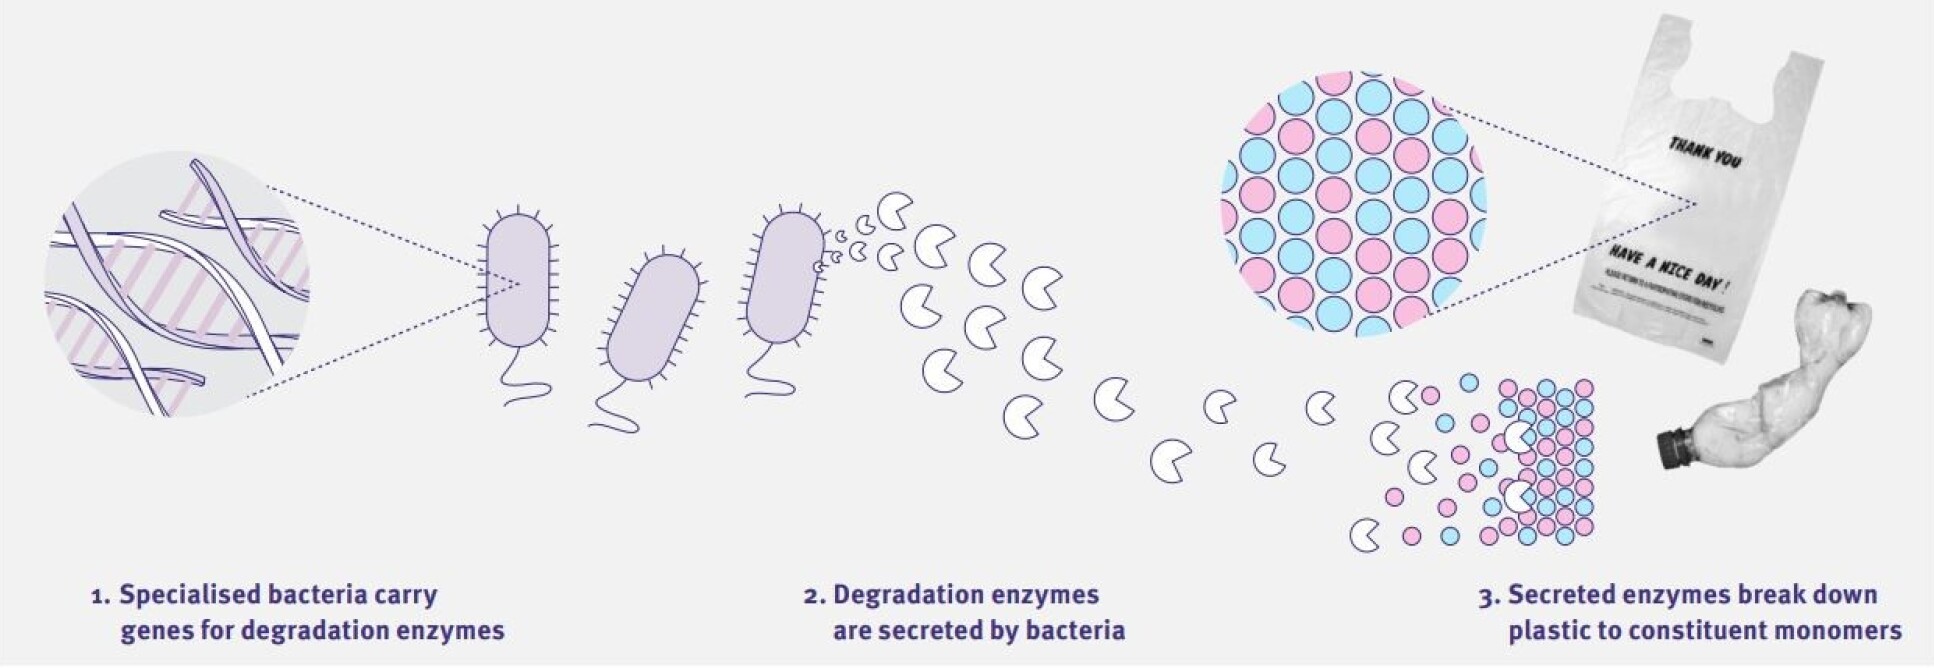 Plastic-degrading bacteria secrete enzymes to break down polymers into their structural subunits (monomers)